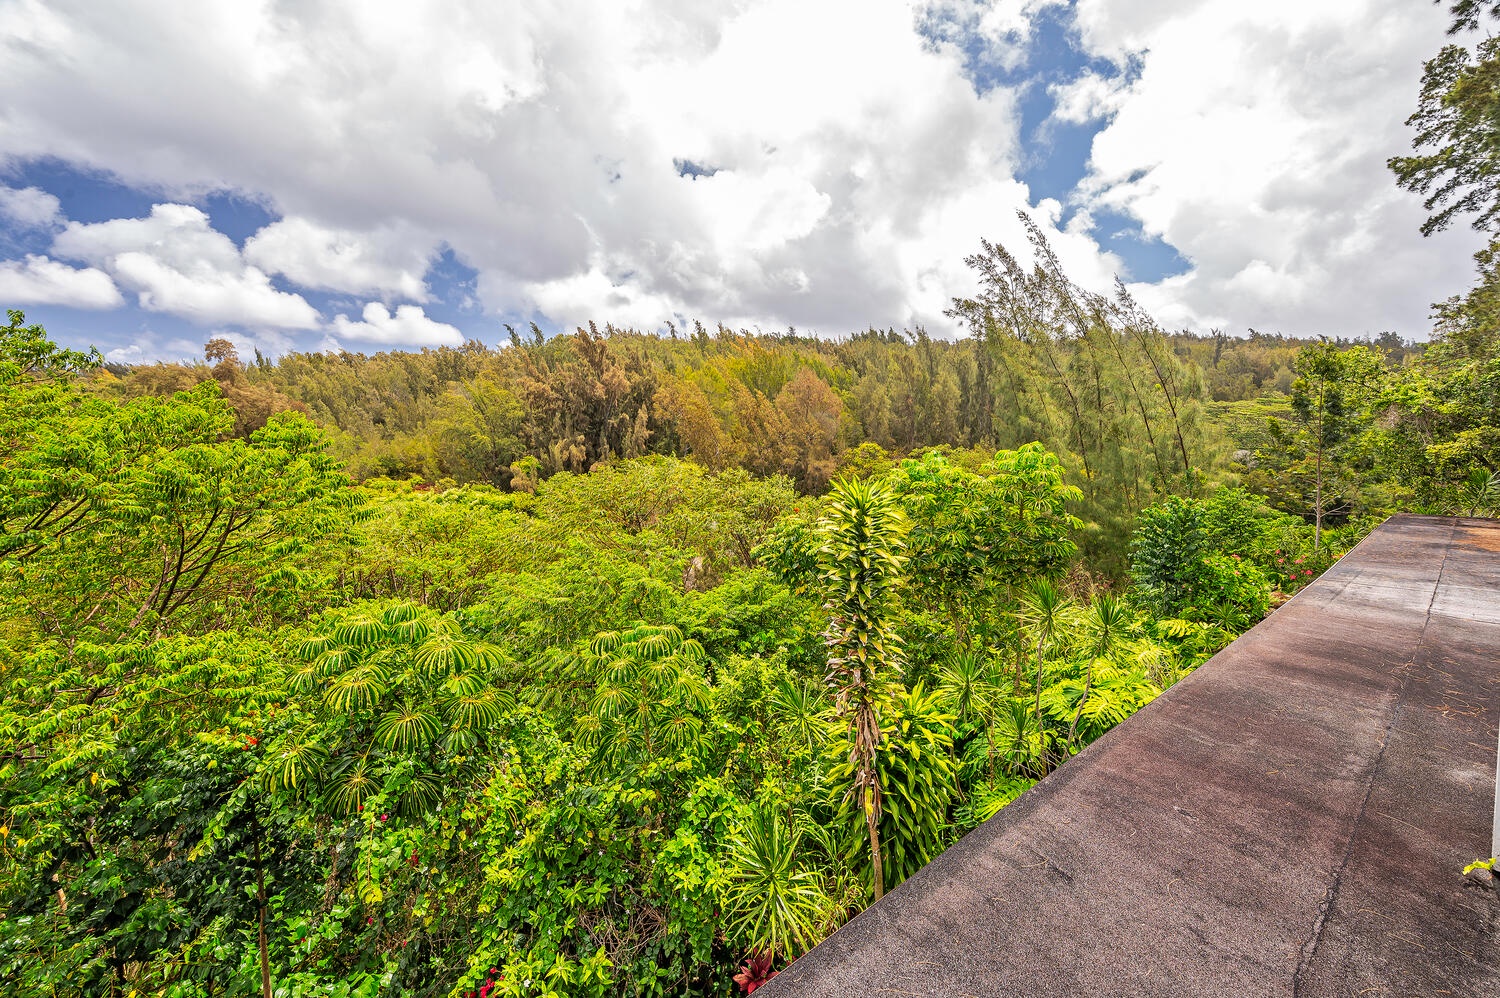 Haleiwa Vacation Rentals, Mele Makana - The Pupukea Paumalu Forest Reserve is home to thousands of acres of lush foliage